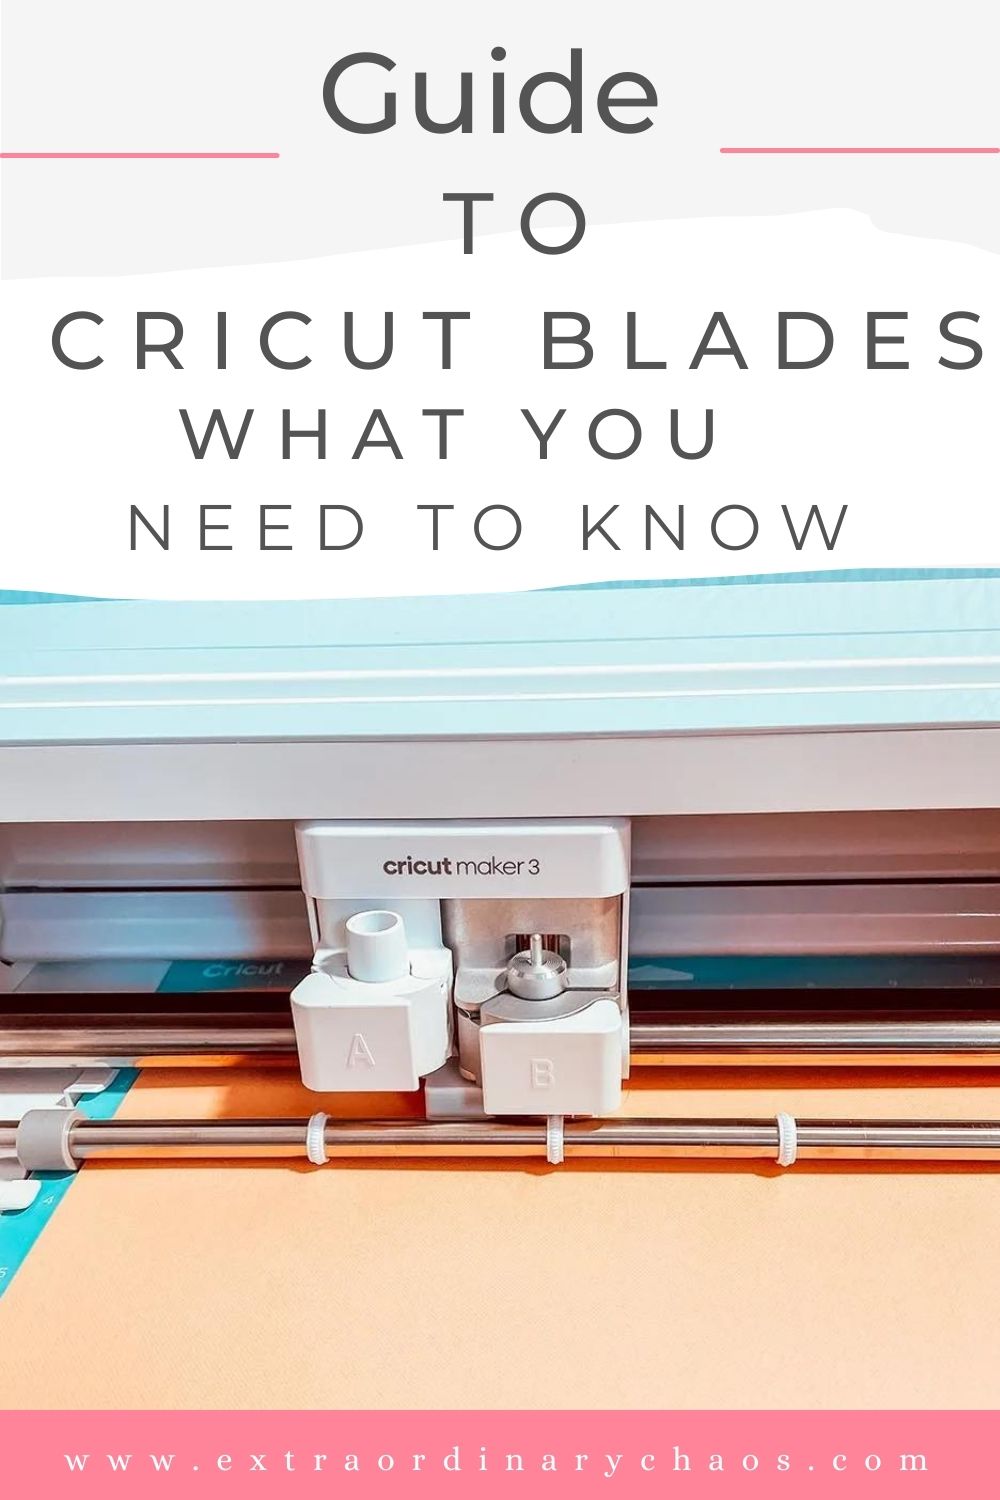 Guide To Cricut Blades And Cutting Tools ⋆ Extraordinary Chaos